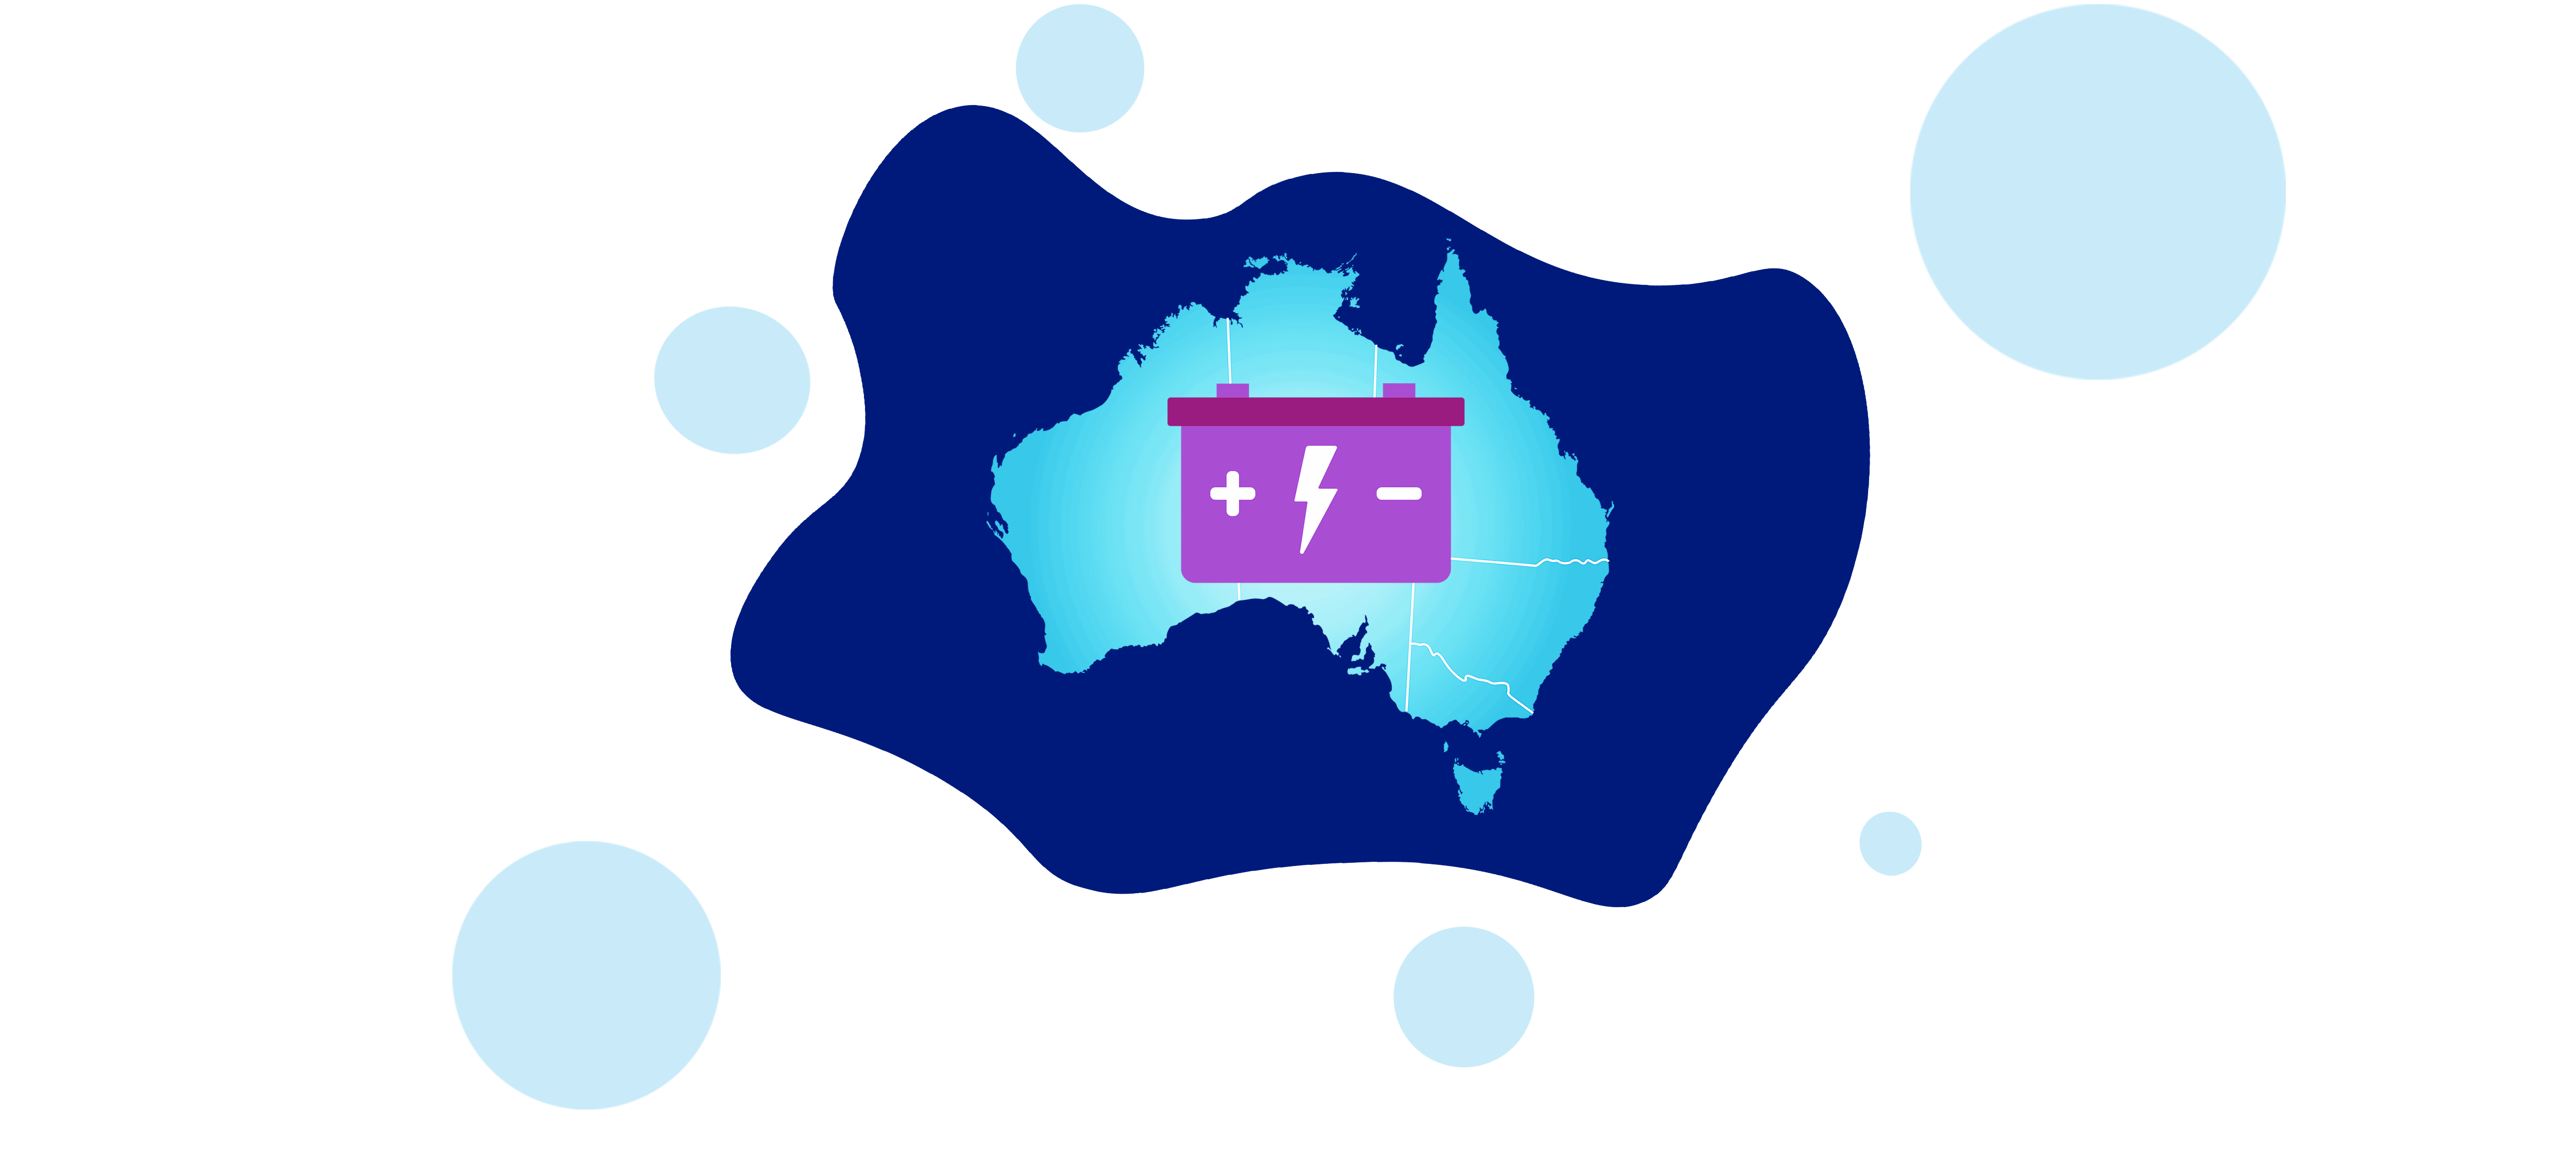 An illustration of a map of Australia with an electricity symbol.